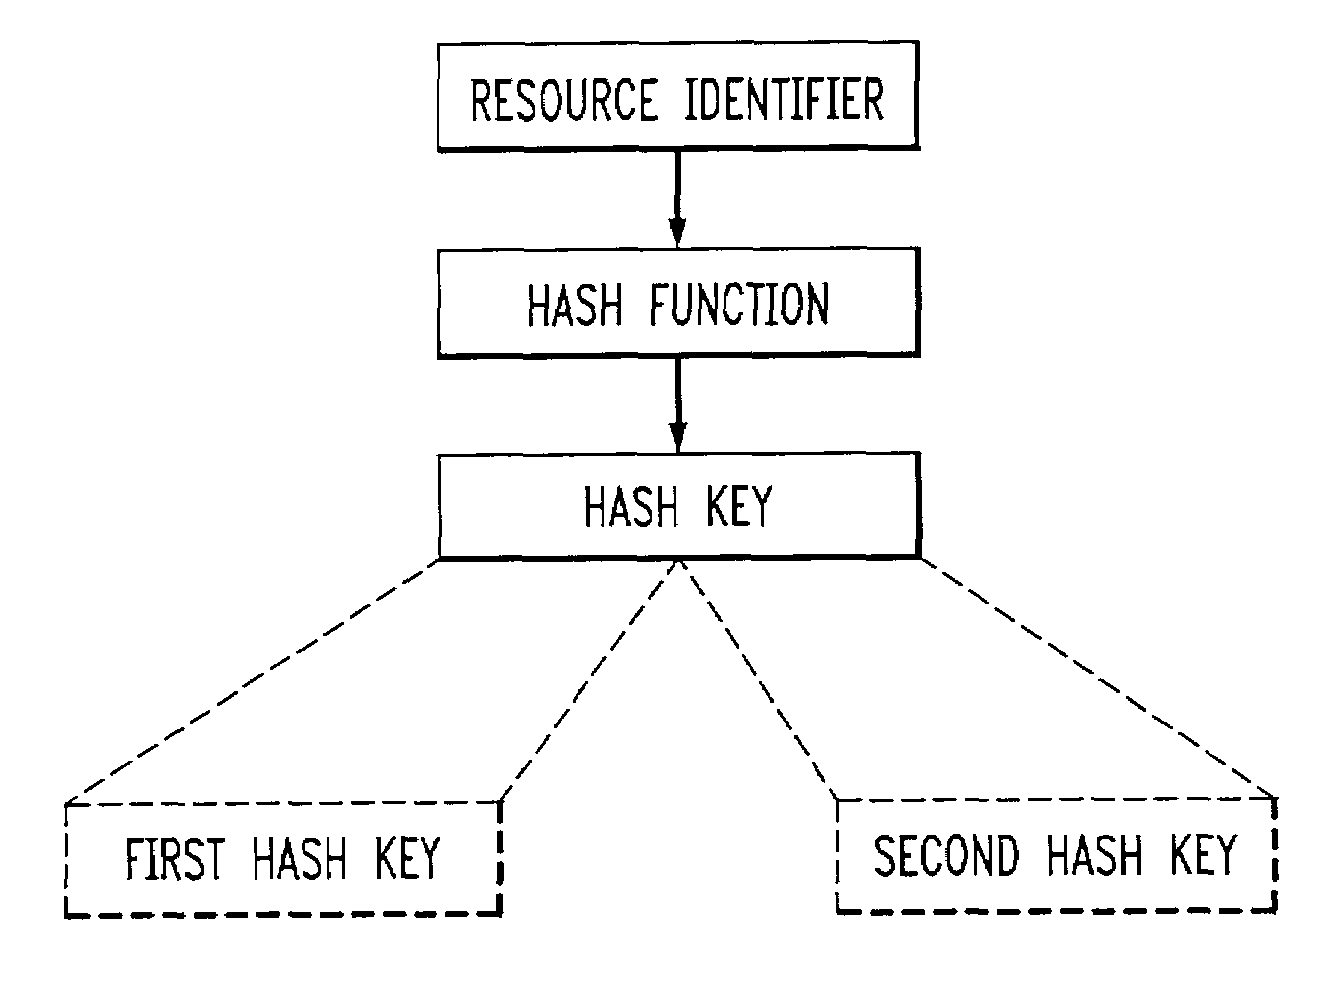 Distributed caching architecture for computer networks